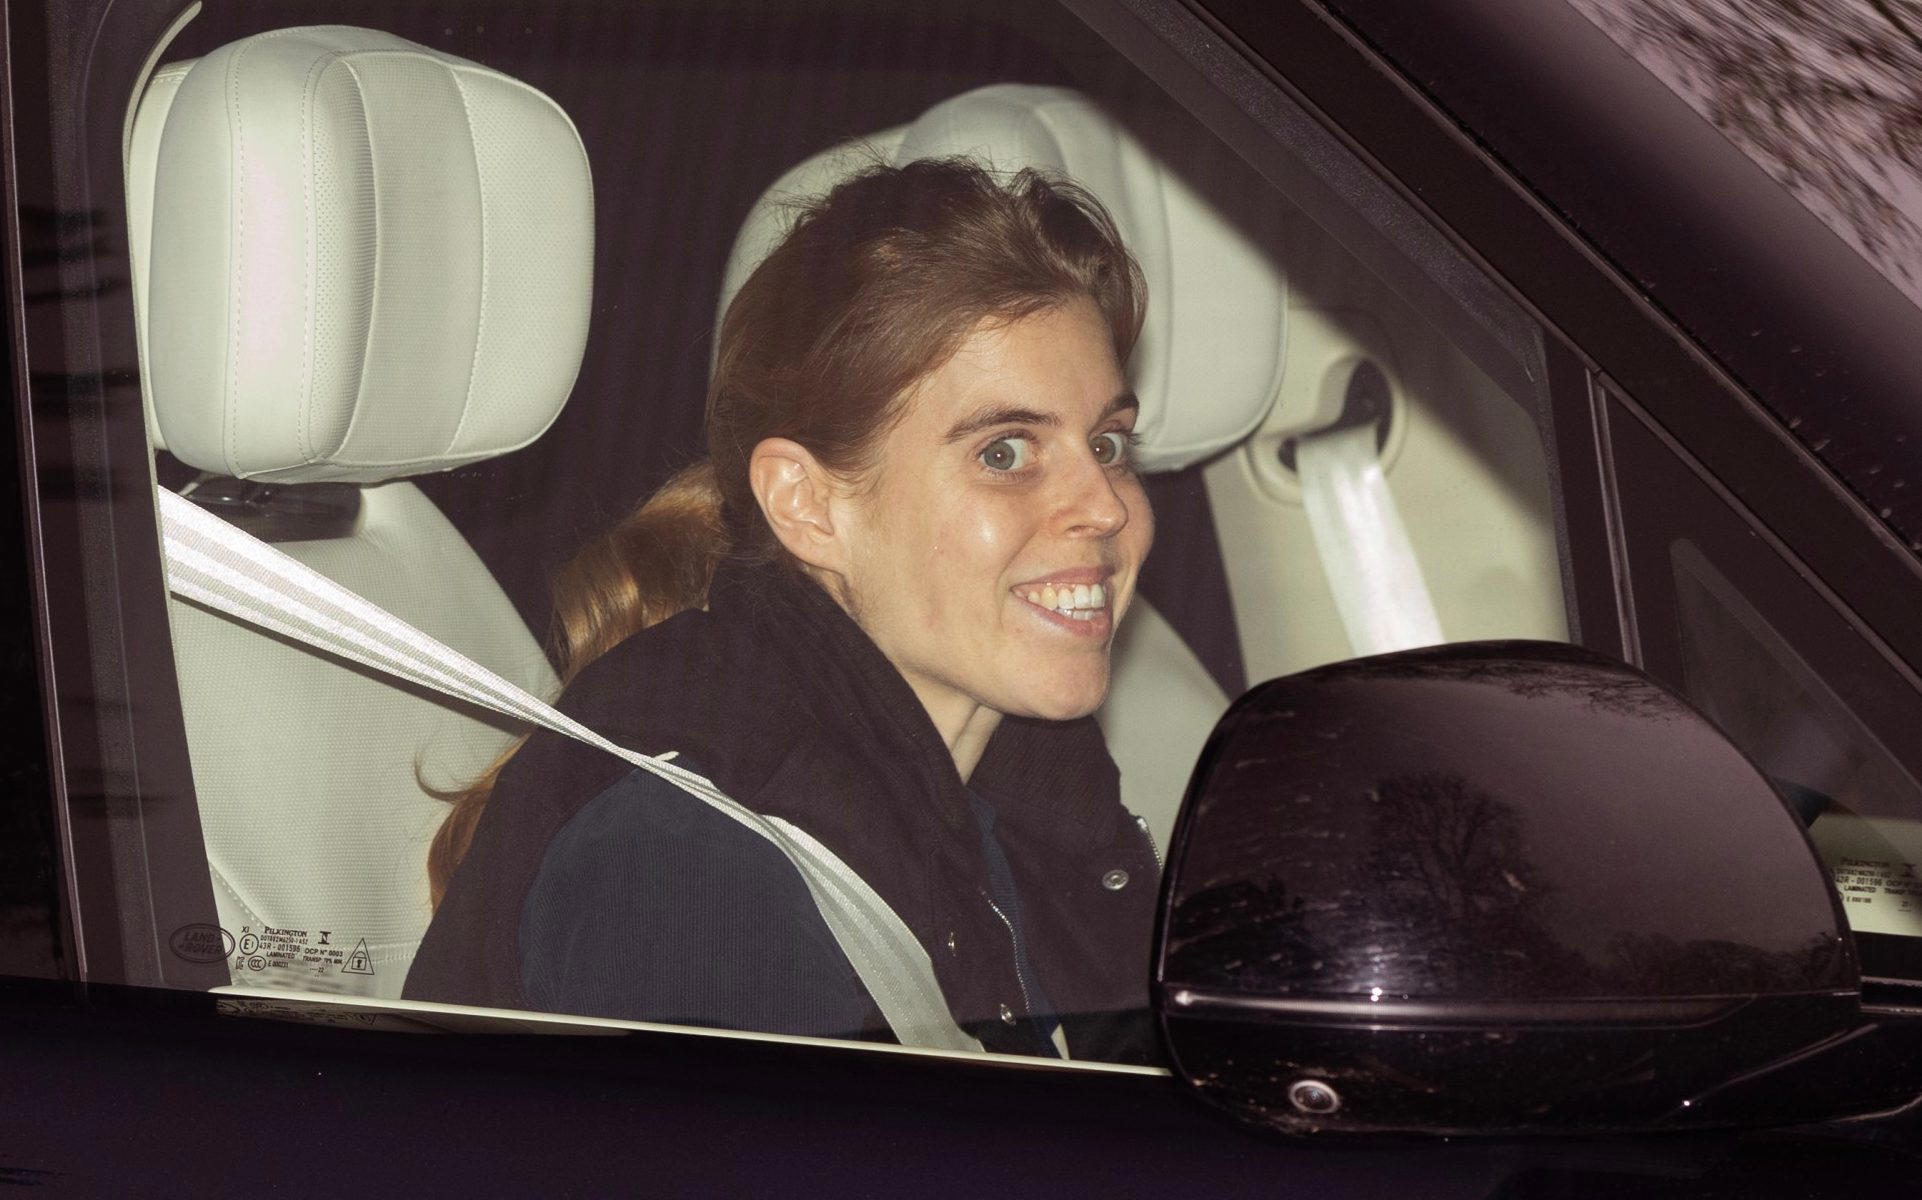 Princess Beatrice visits Prince Andrew after Epstein court files released